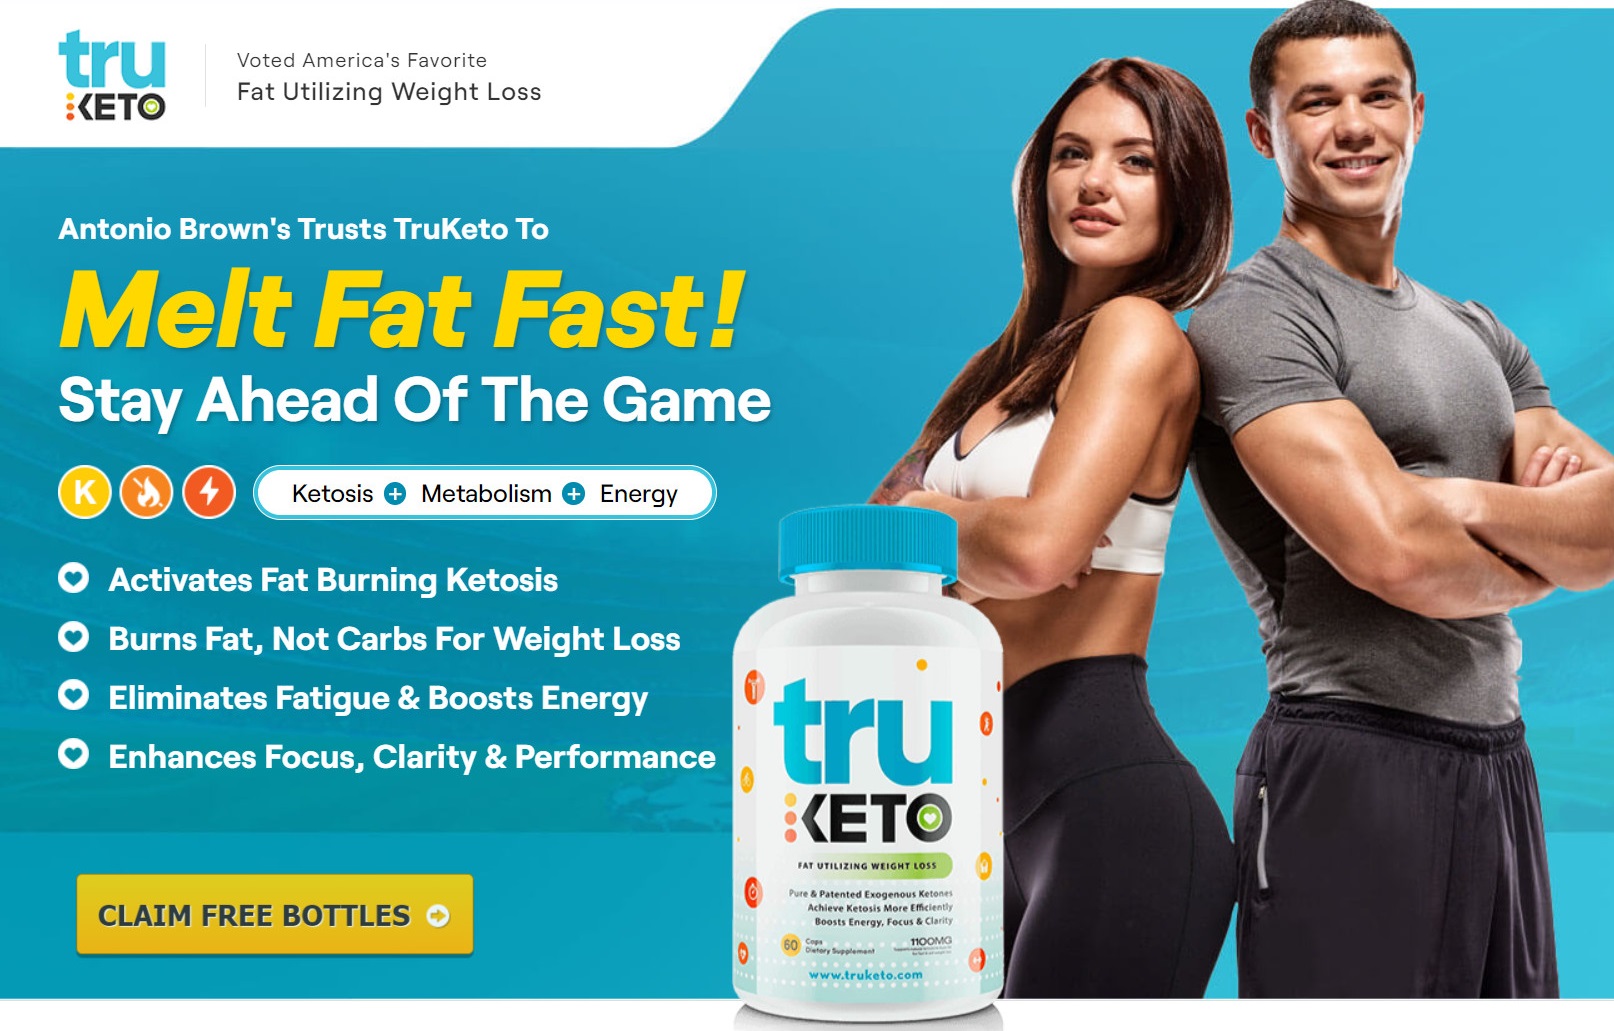 TruKeto Recommended By Antonio Brown Buy Now